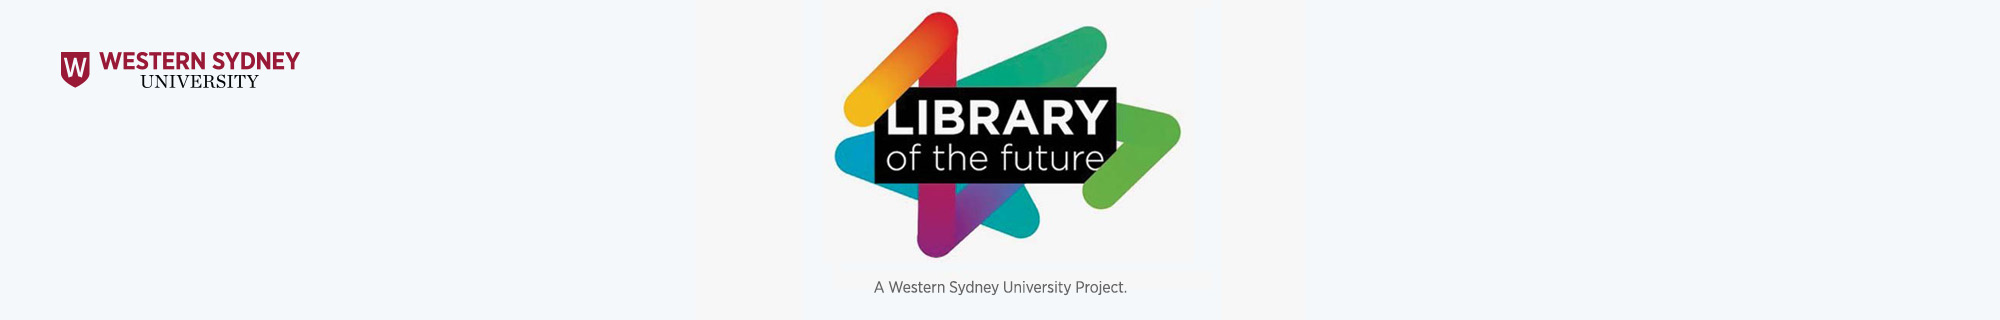 Library of the Future